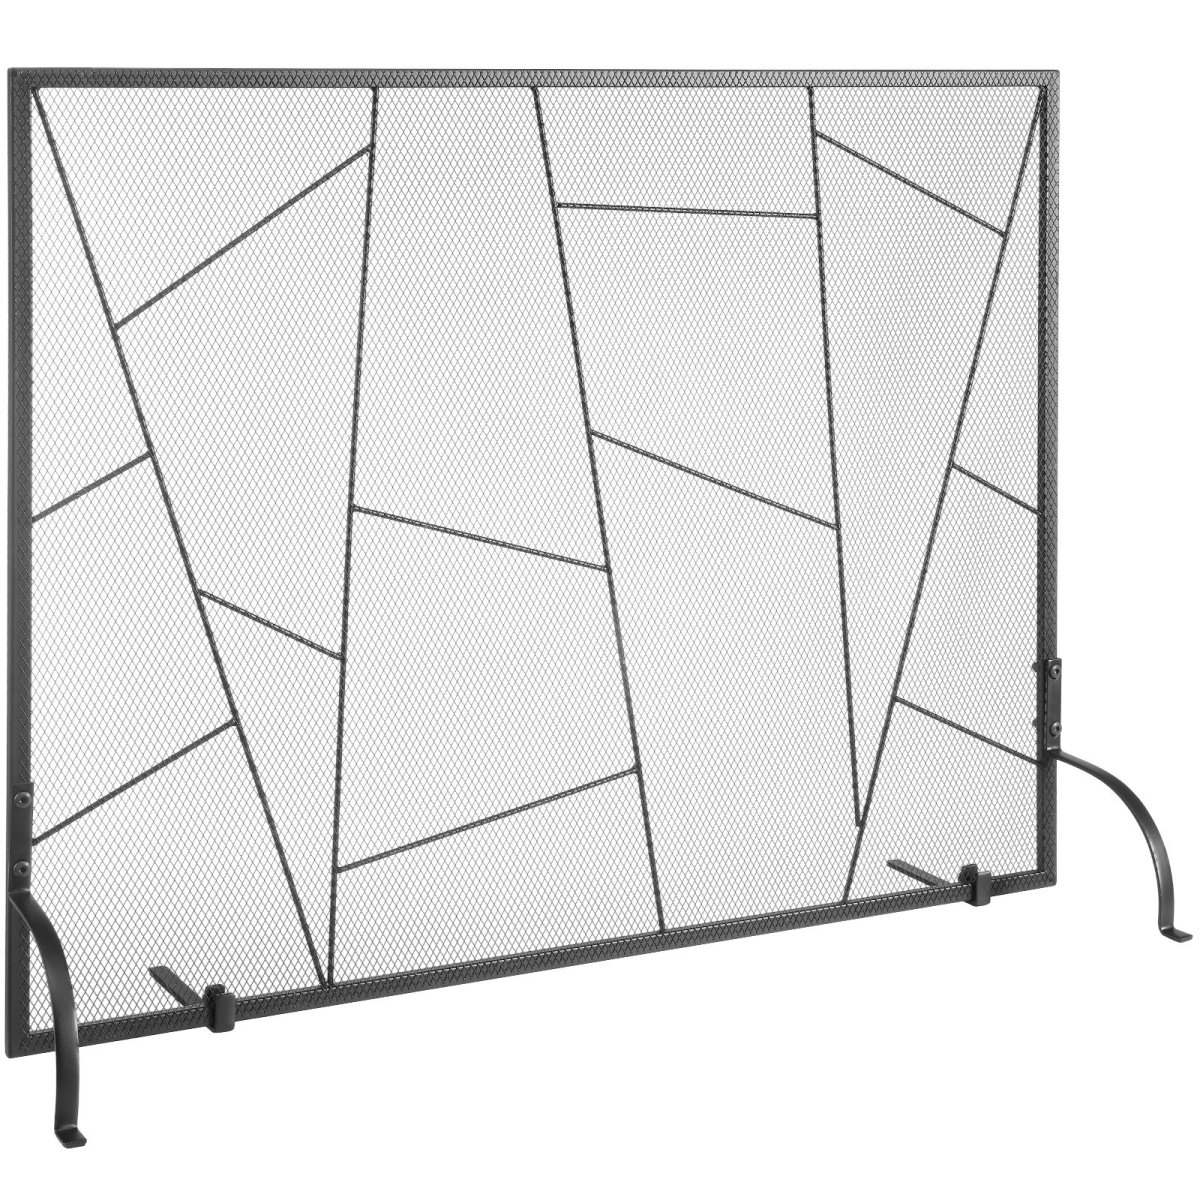 Picture of Vevor BLMHSJY3545I7H0S1V0 35.6 x 28.4 in. Sturdy Iron Mesh Fireplace Screen Spark Guard Cover